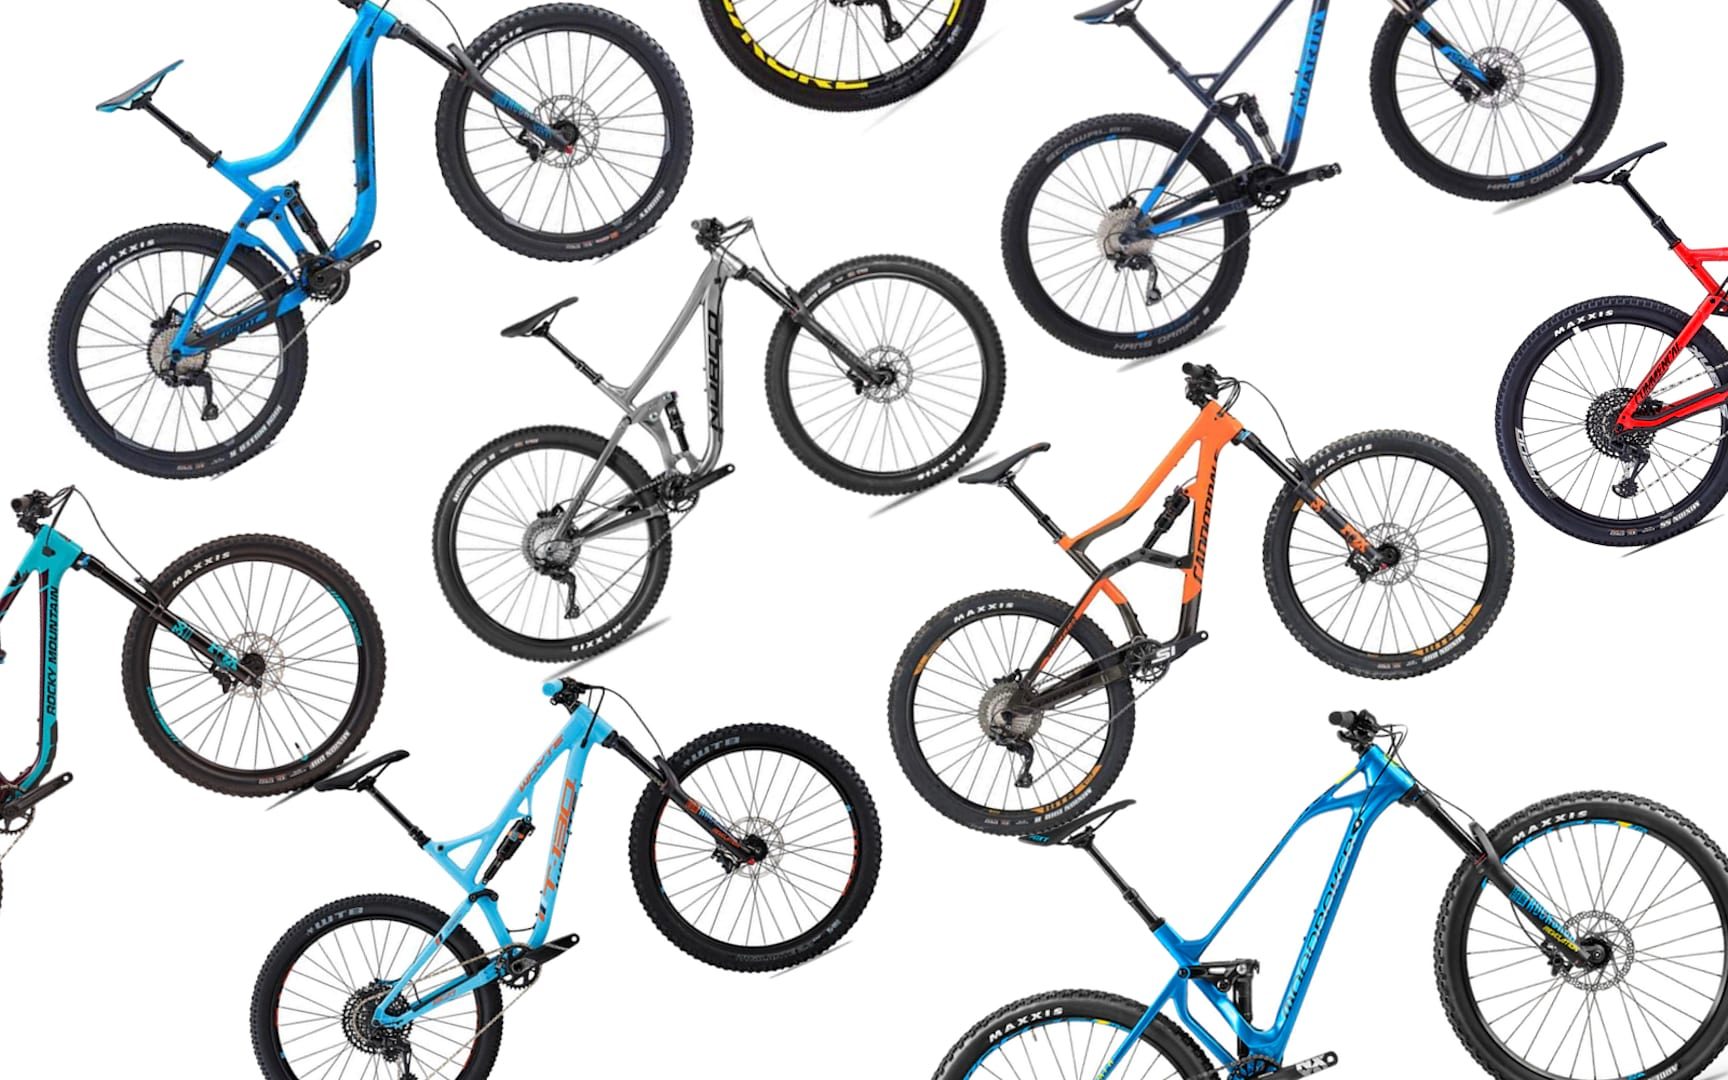 Top 10 2018 Black Friday Mountain Bike Deals – Save As Much As £1500 On 2018 Bikes ...